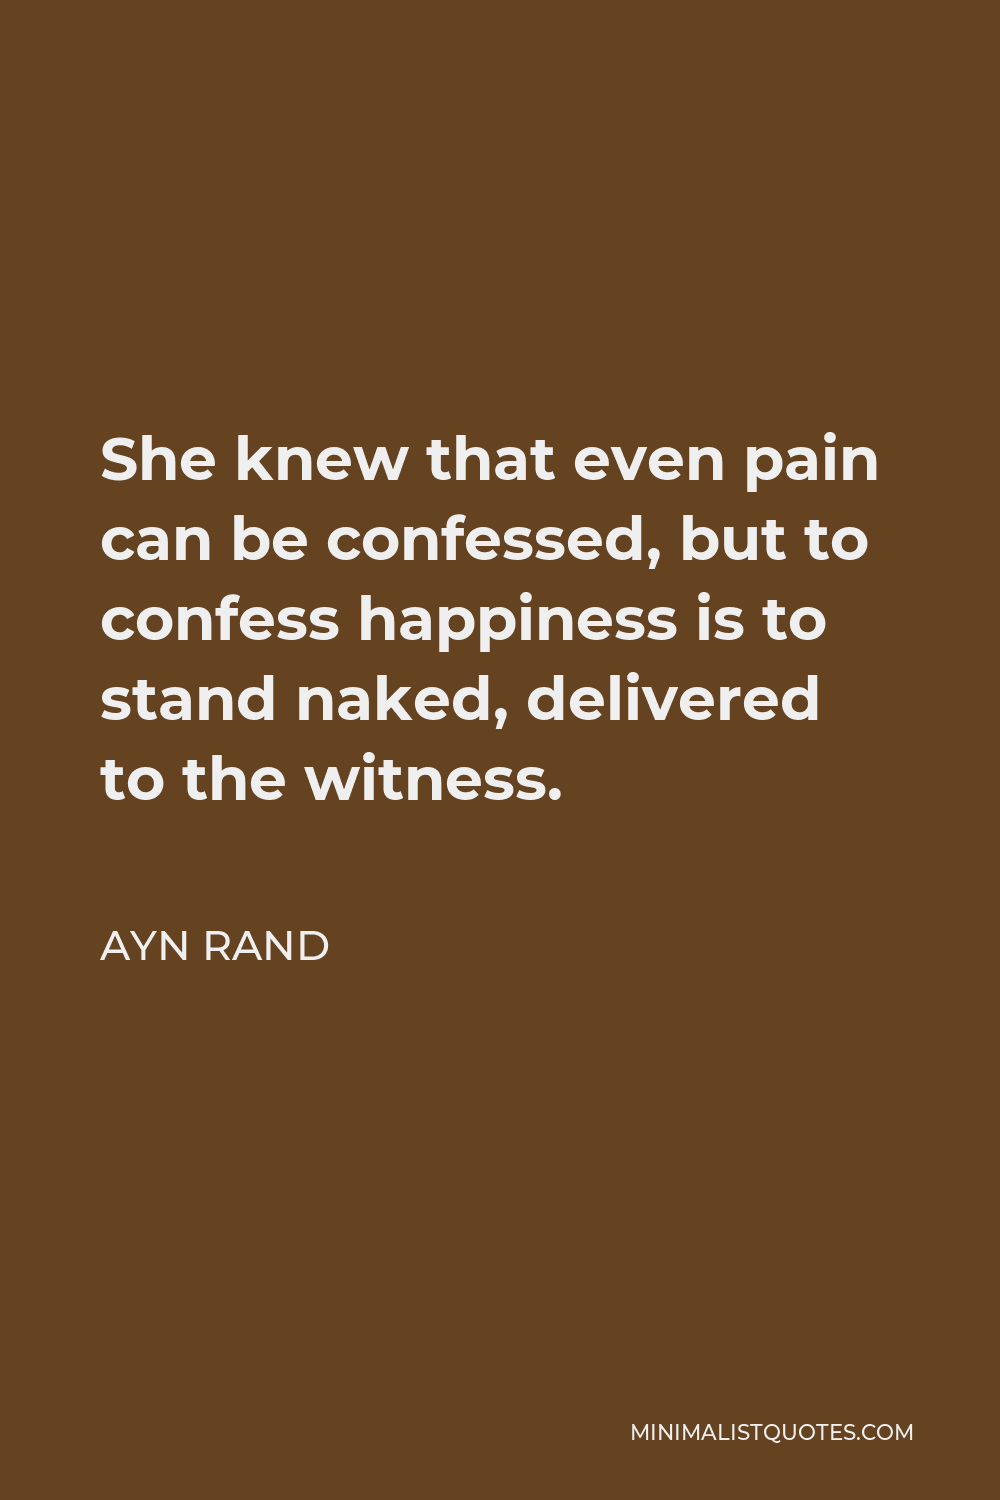 Ayn Rand Quote - She knew that even pain can be confessed, but to confess happiness is to stand naked, delivered to the witness.